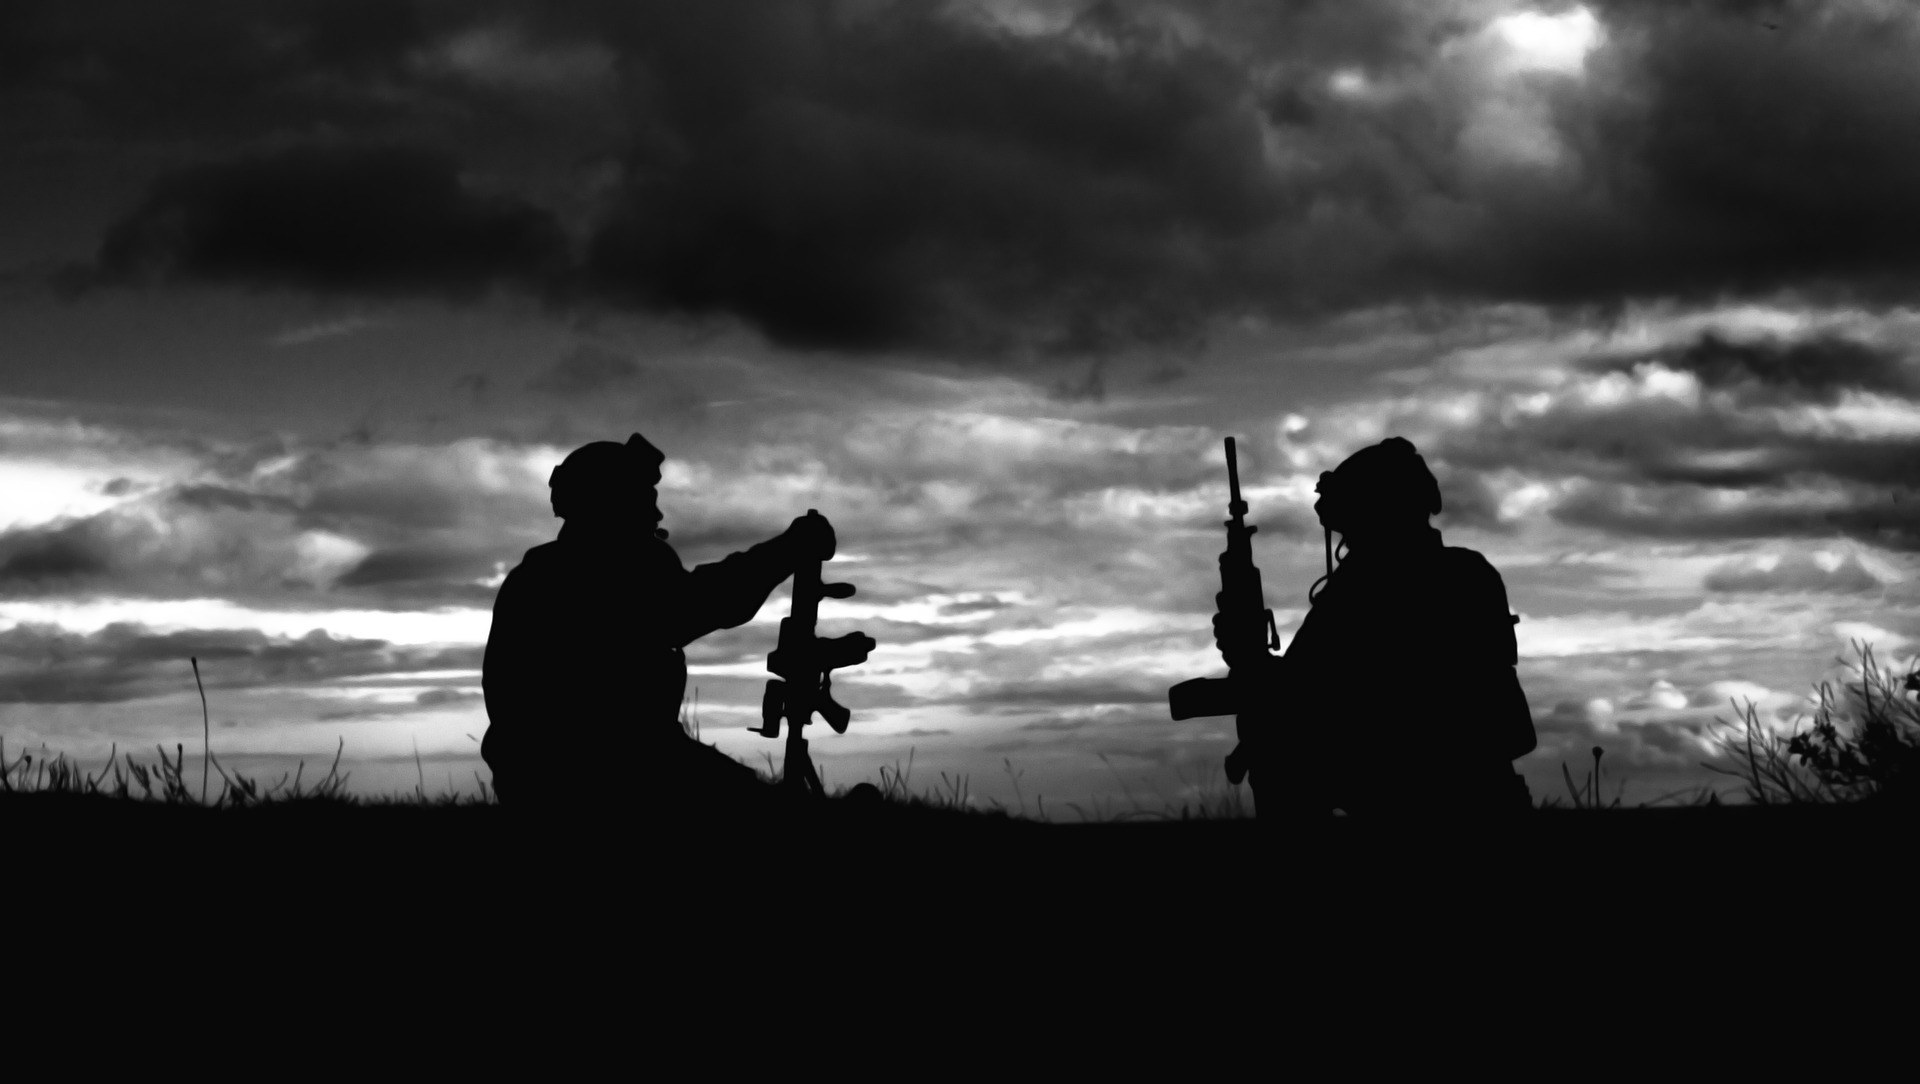 war soldiers, veterans: Image by Daniel Hadman from Pixabay